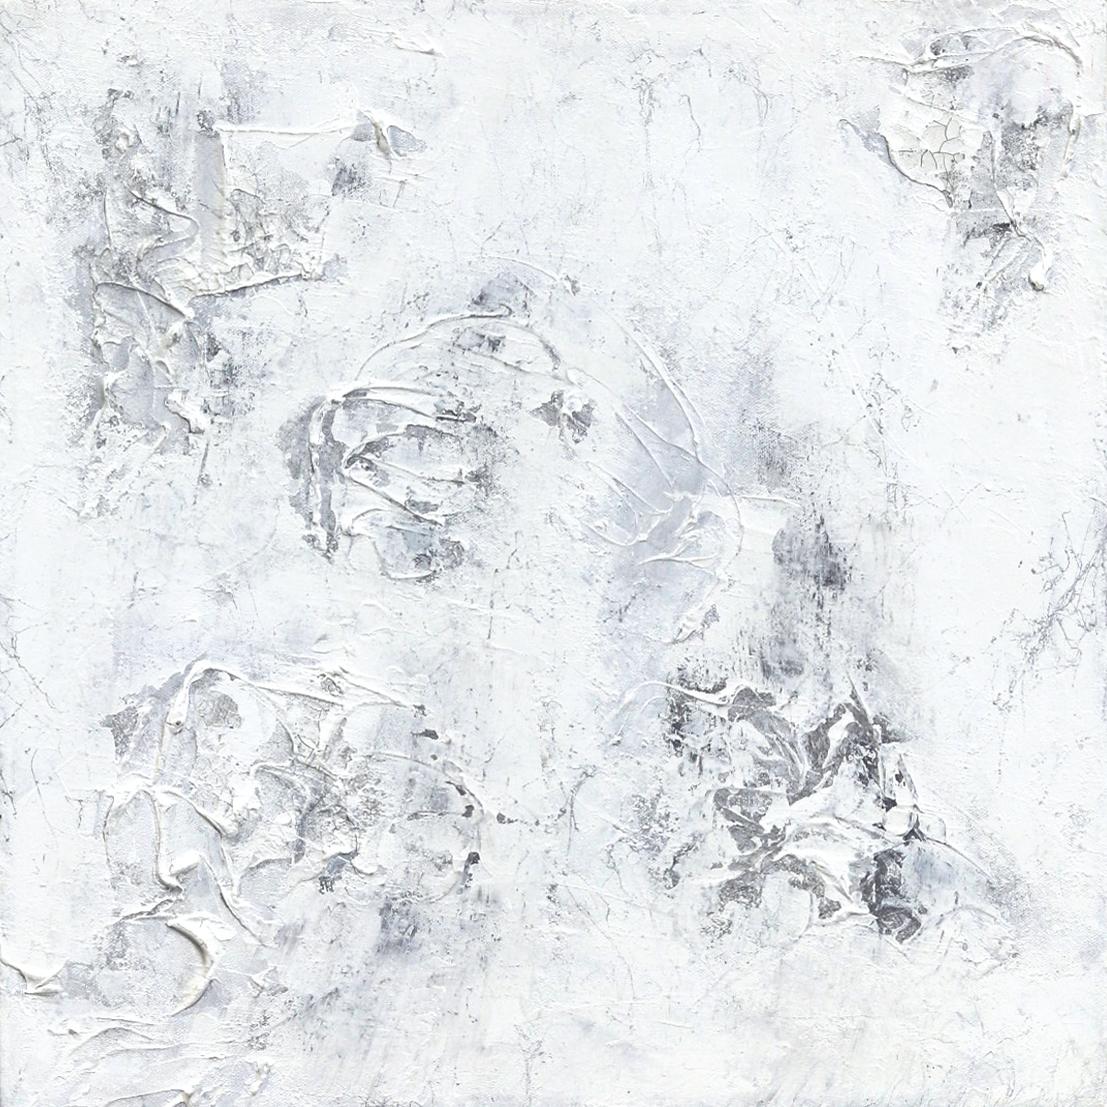 Inflamer - Textural Minimalist White Layered Painting on Canvas